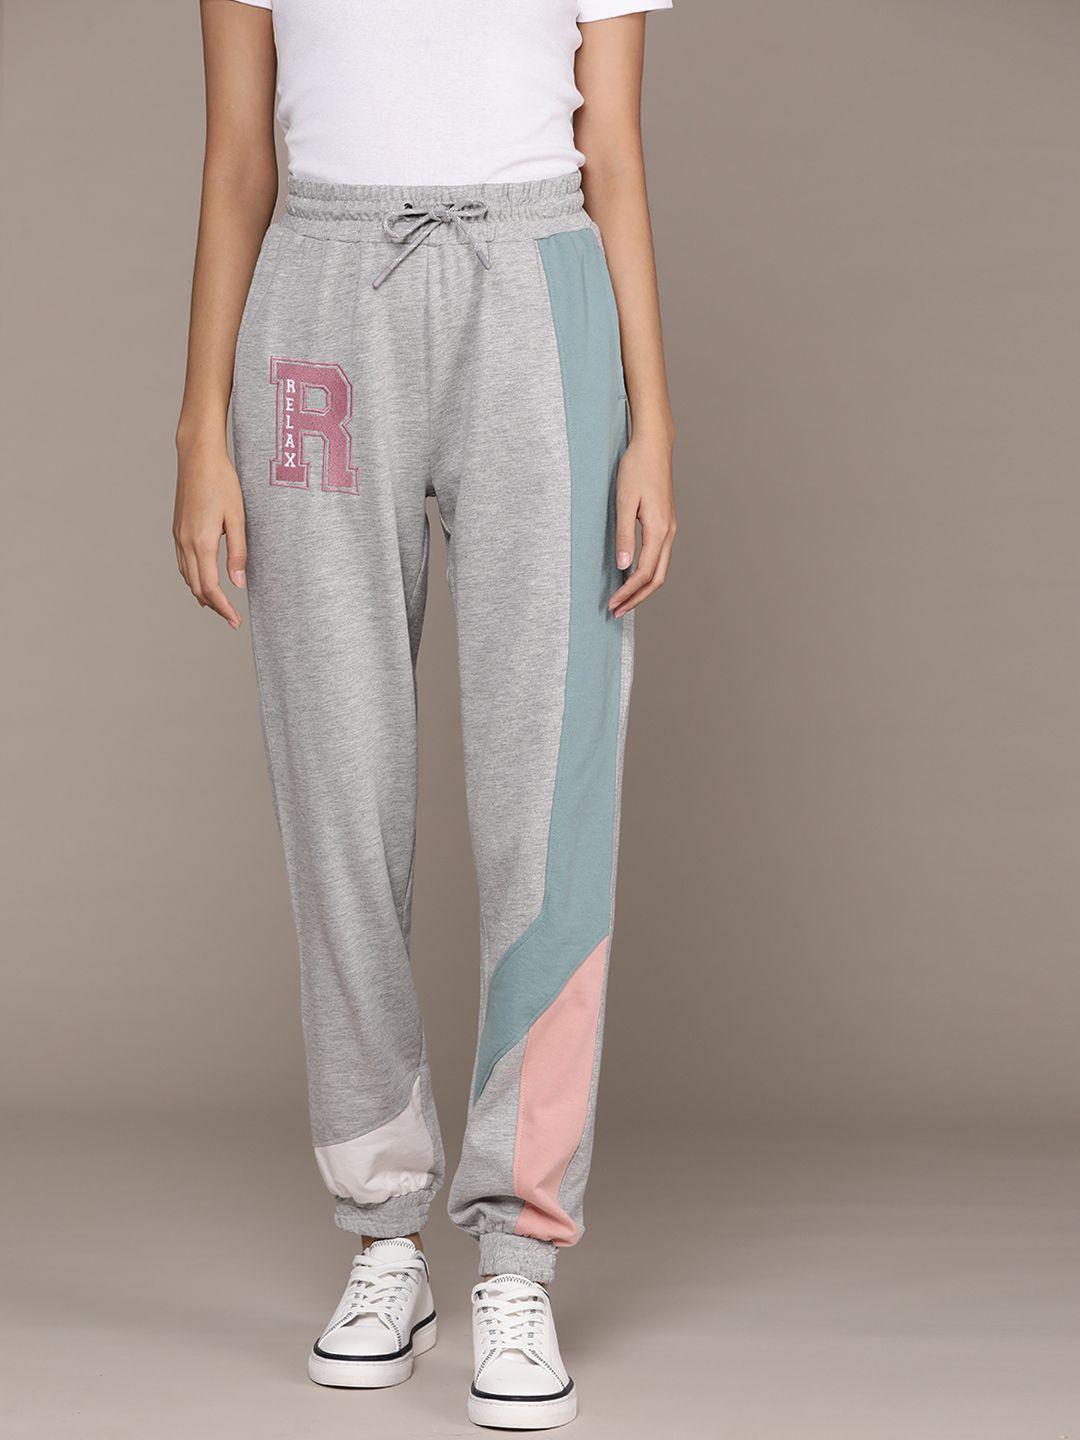 The Roadster Lifestyle Co. x RE/LAX Women Striped Joggers